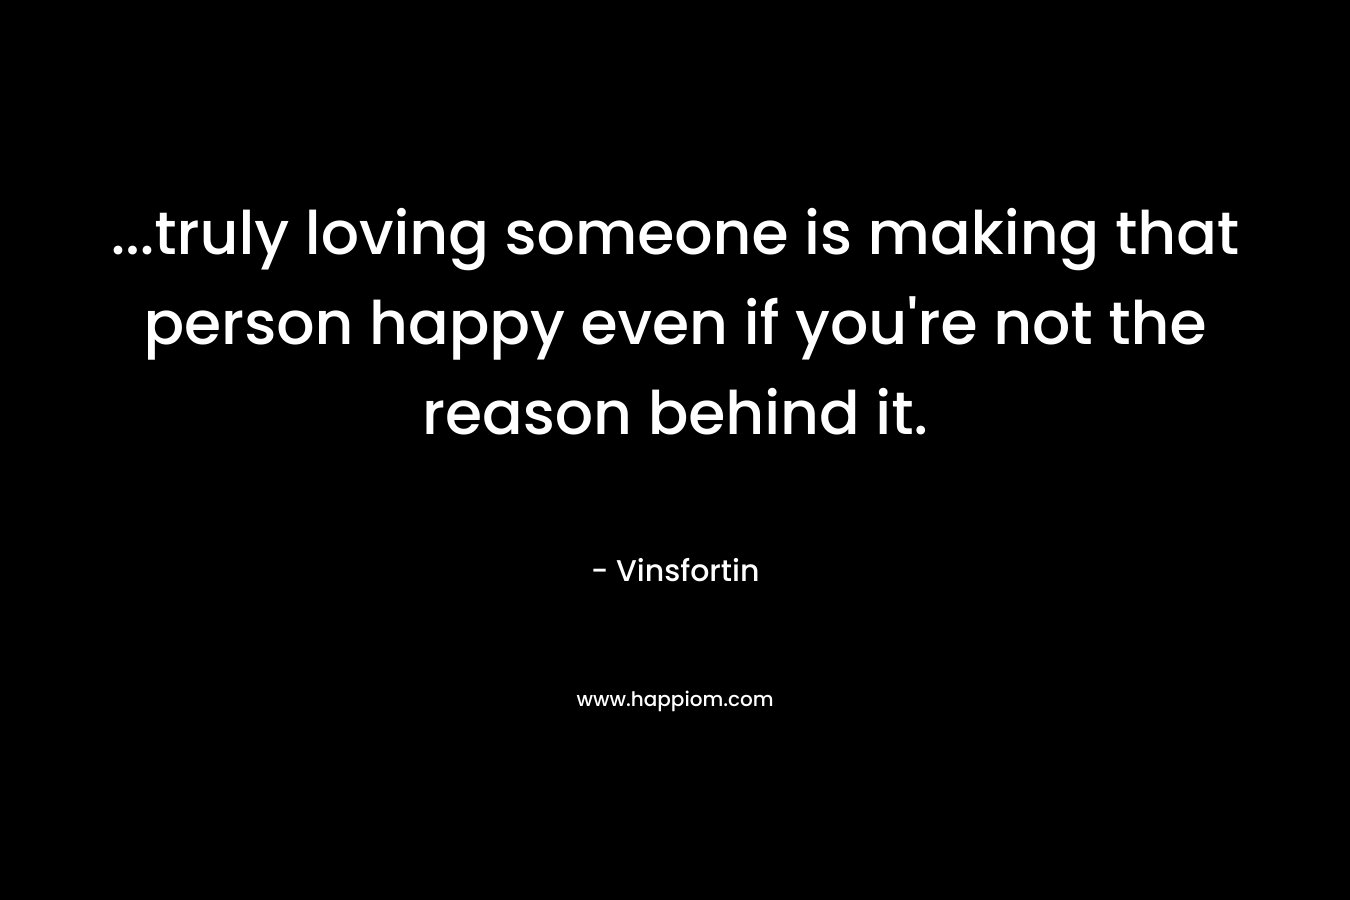 …truly loving someone is making that person happy even if you’re not the reason behind it. – Vinsfortin